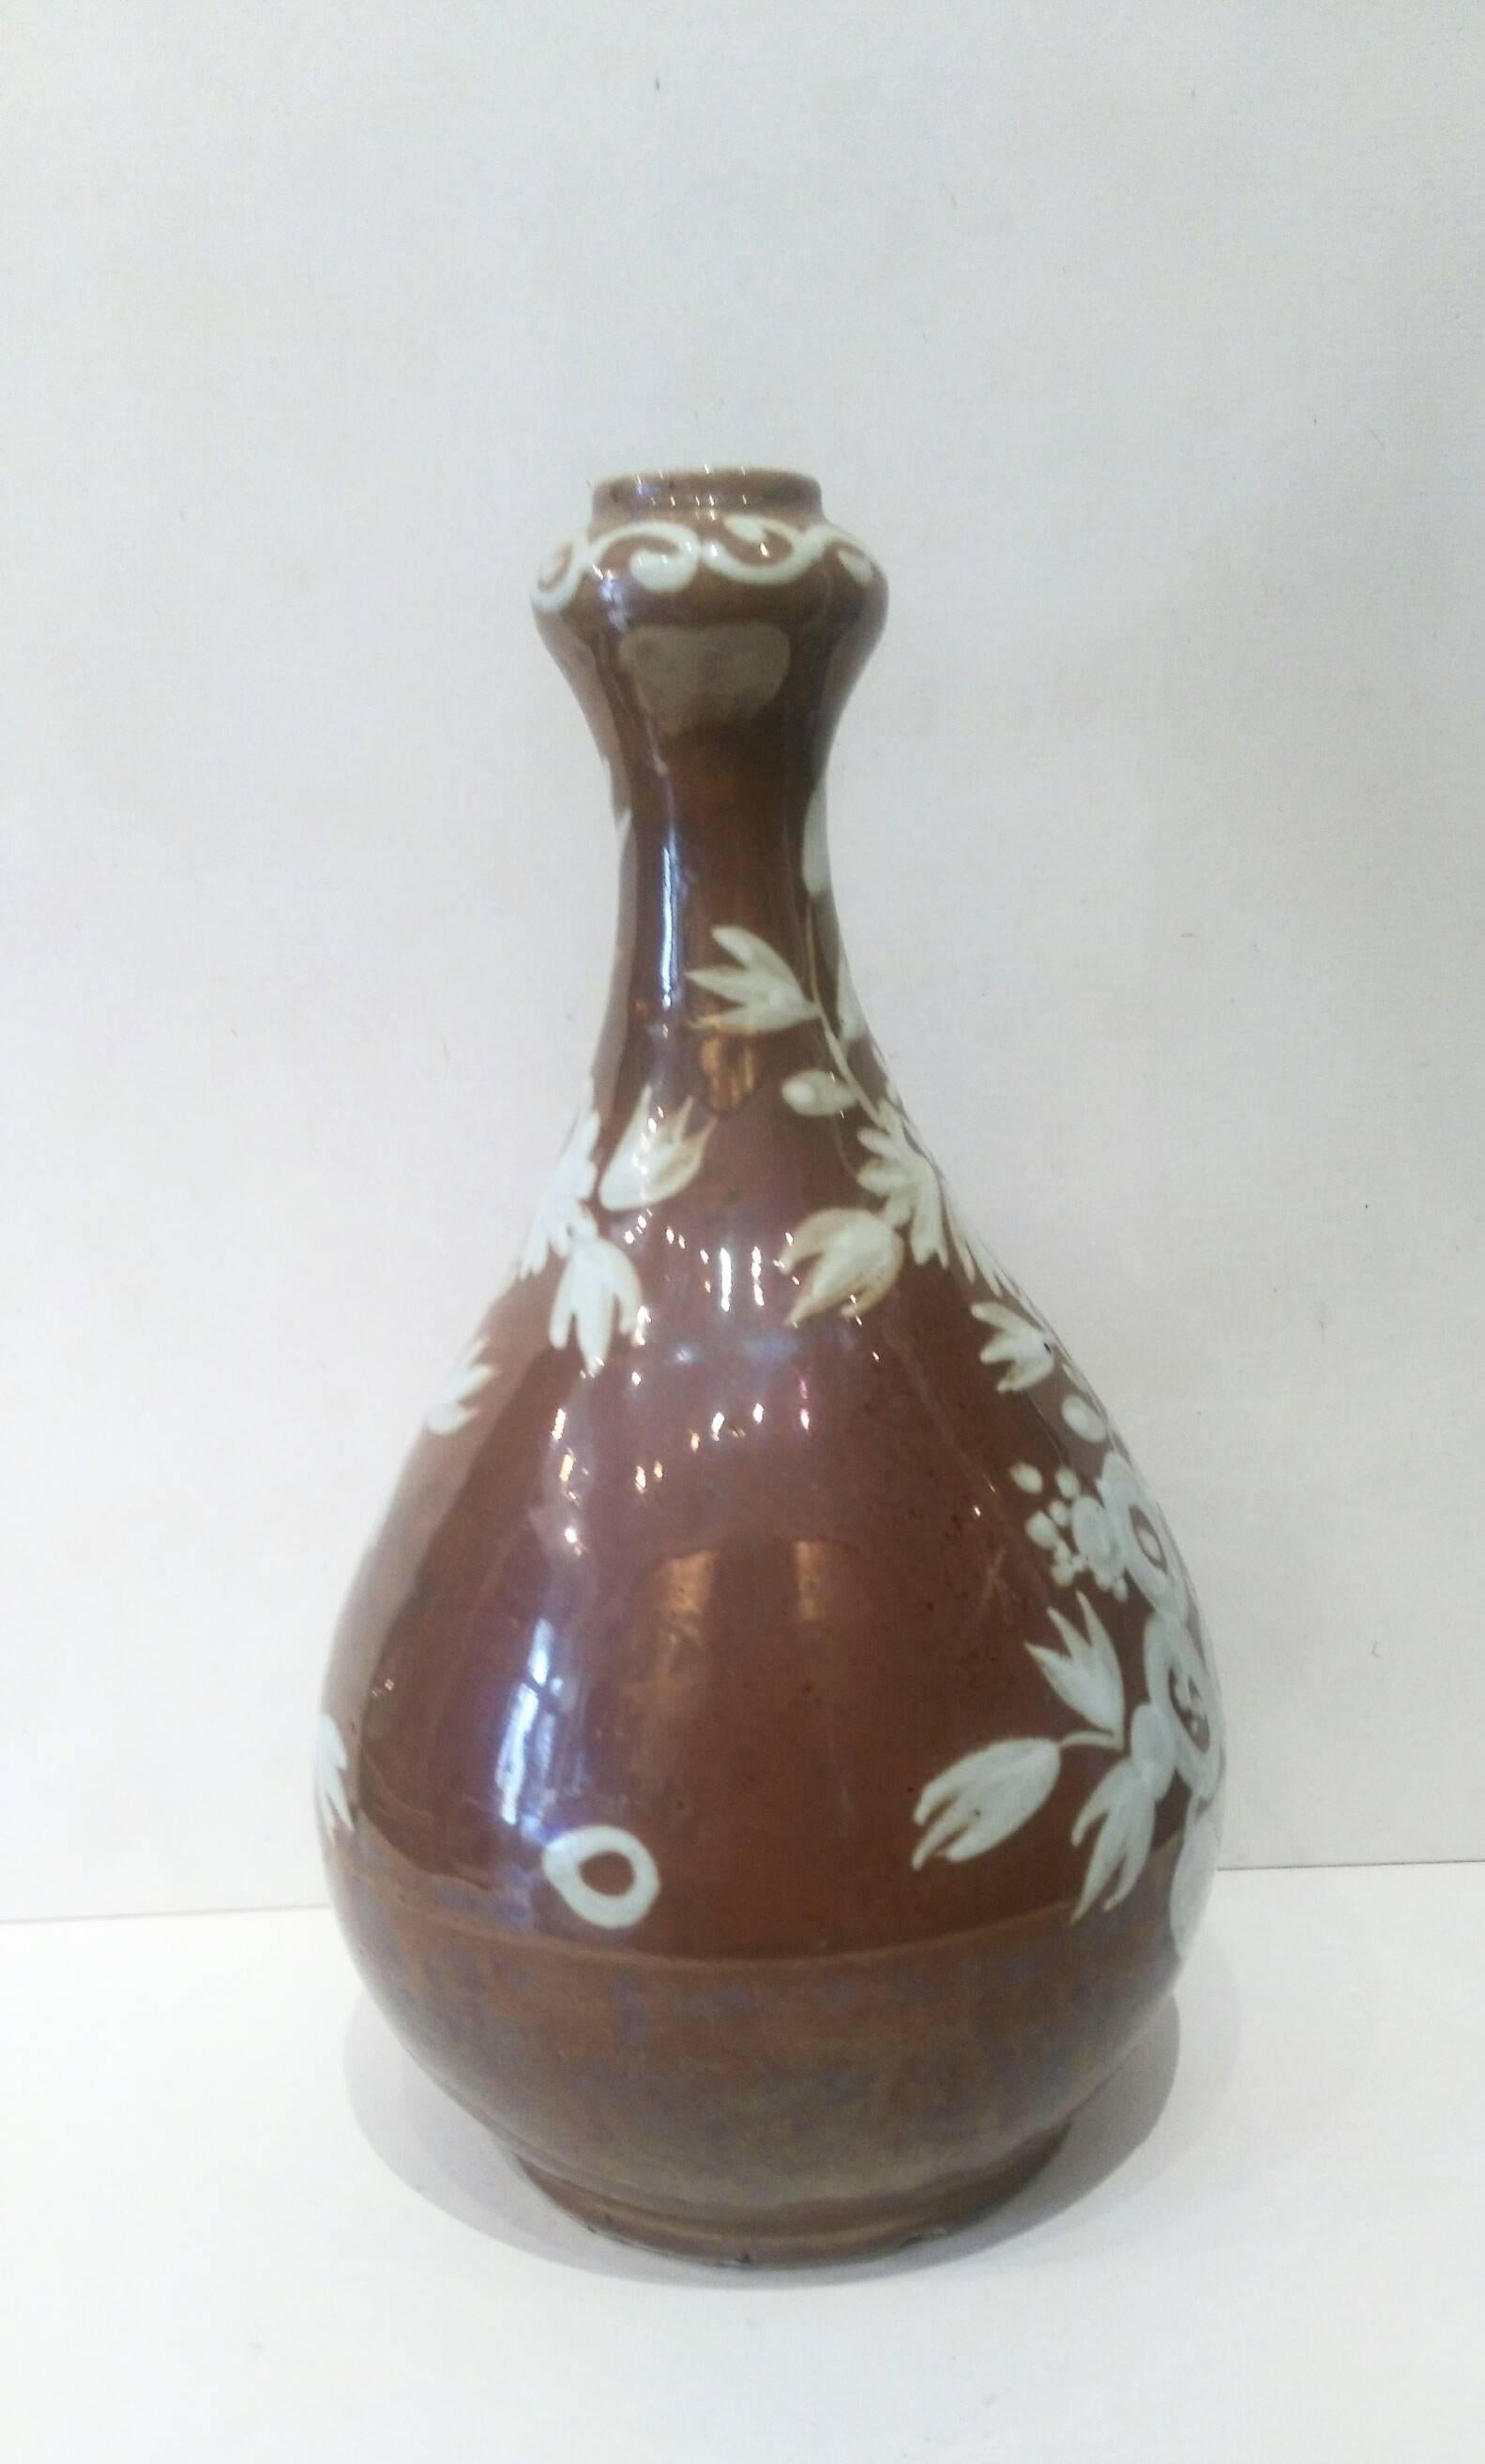 A bottle with garlic bulb shaped mouth, toffee-colored glaze and white slip decoration.
Jingdezhen, Jiangxi province,
China, Ming dynasty, circa 1573-1620.

Similar vase is illustrated in 